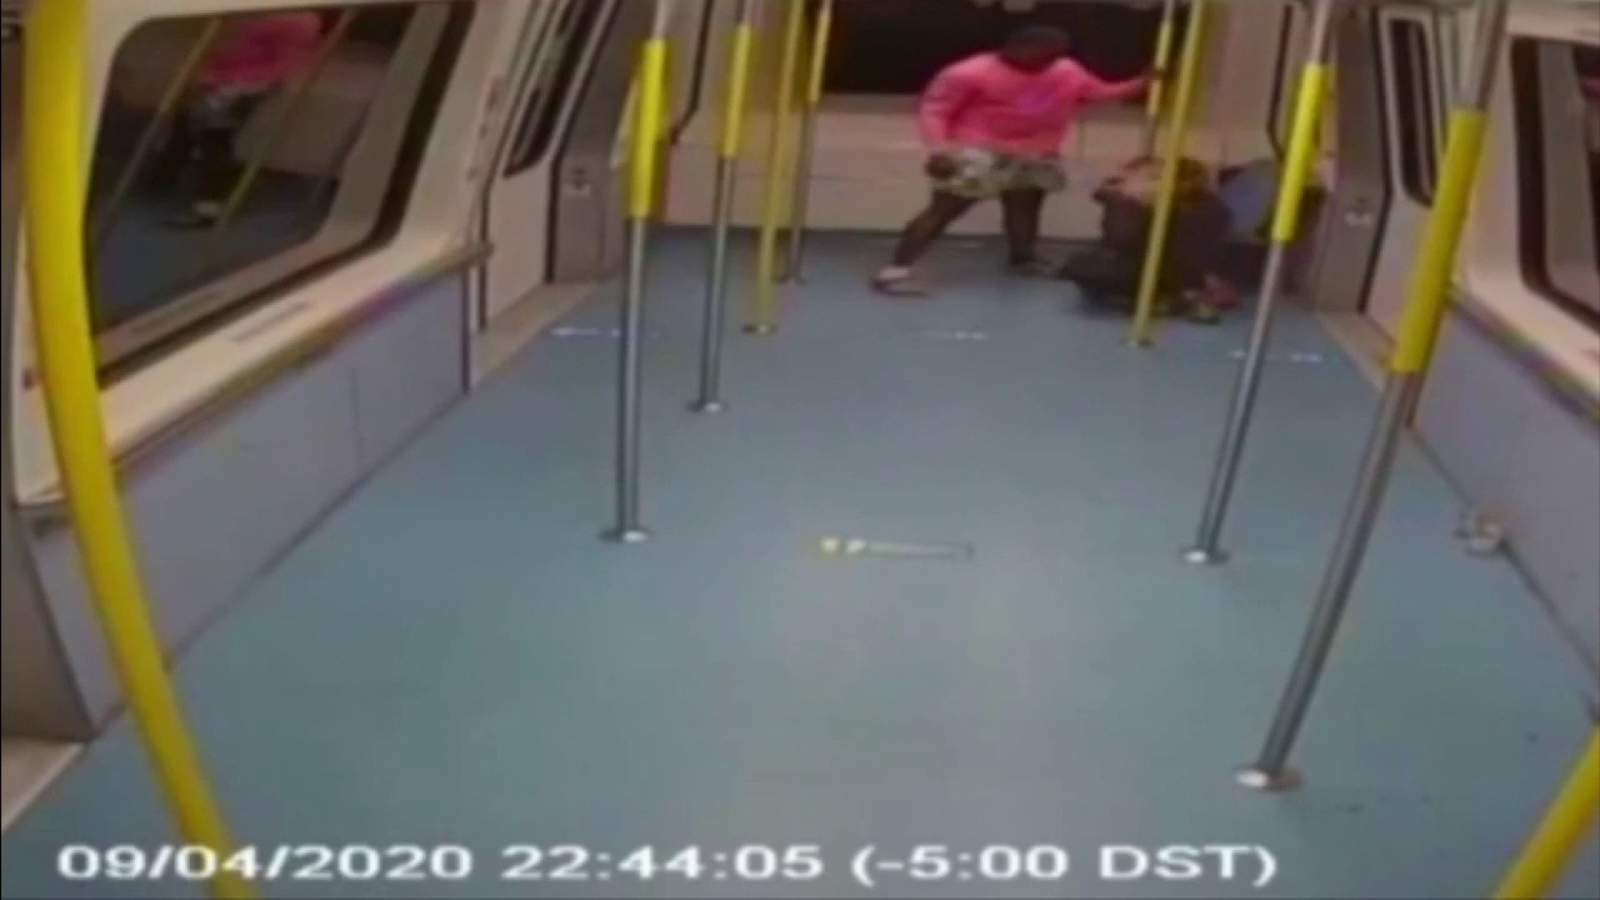 Video shows man beat woman alone in Miami’s Metromover before attacking 2 others